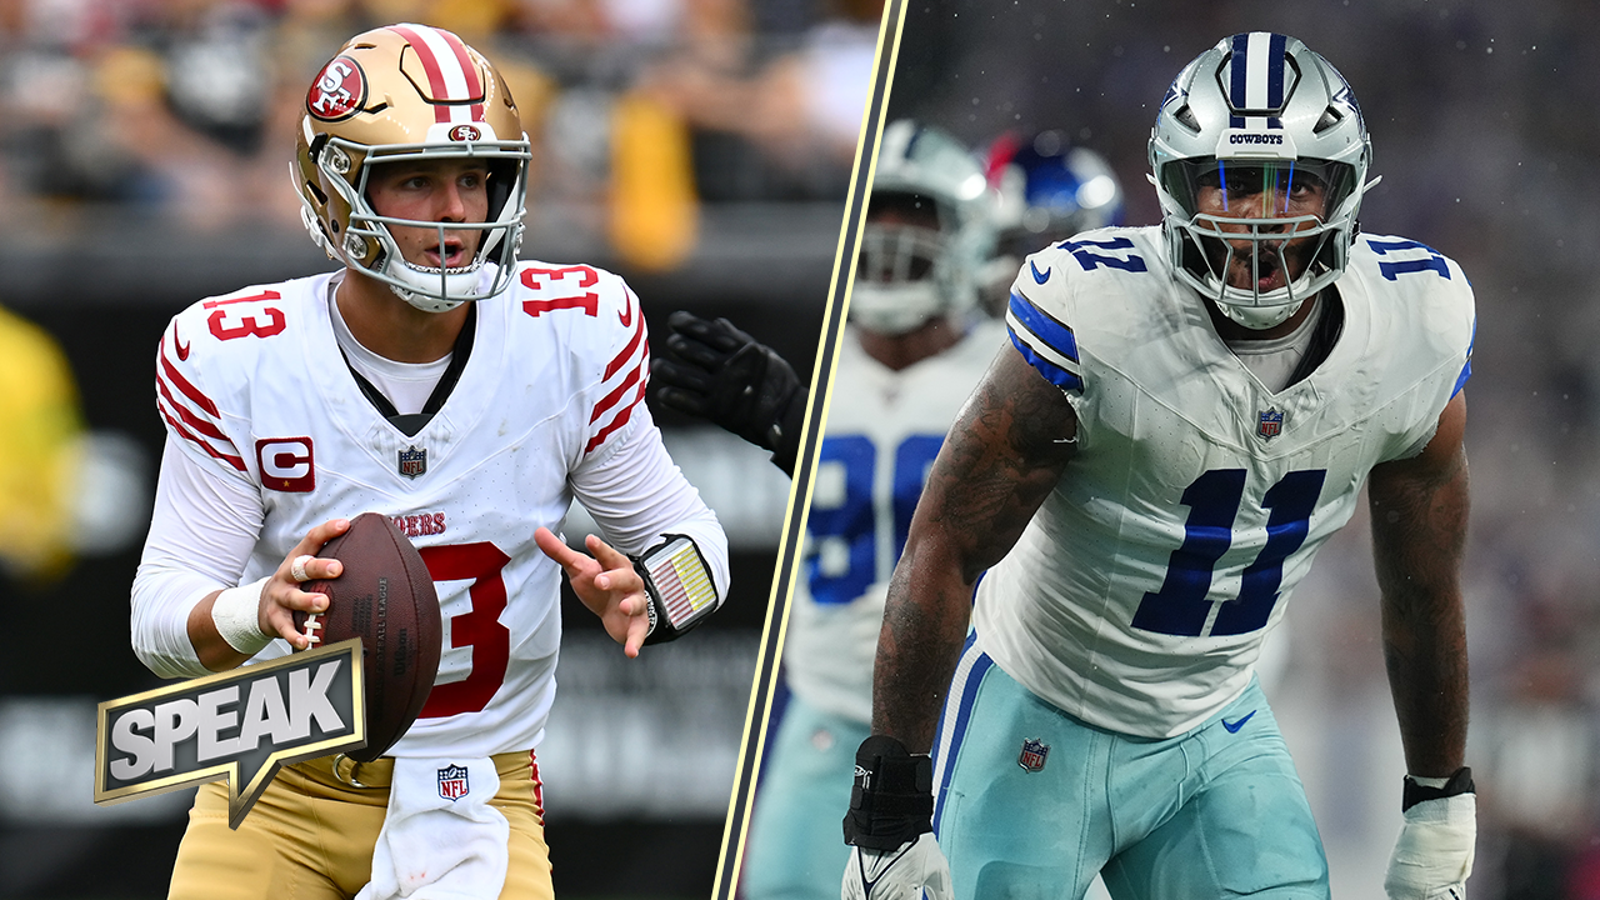 49ers or Cowboys: Who made a bigger statement in Week 1?